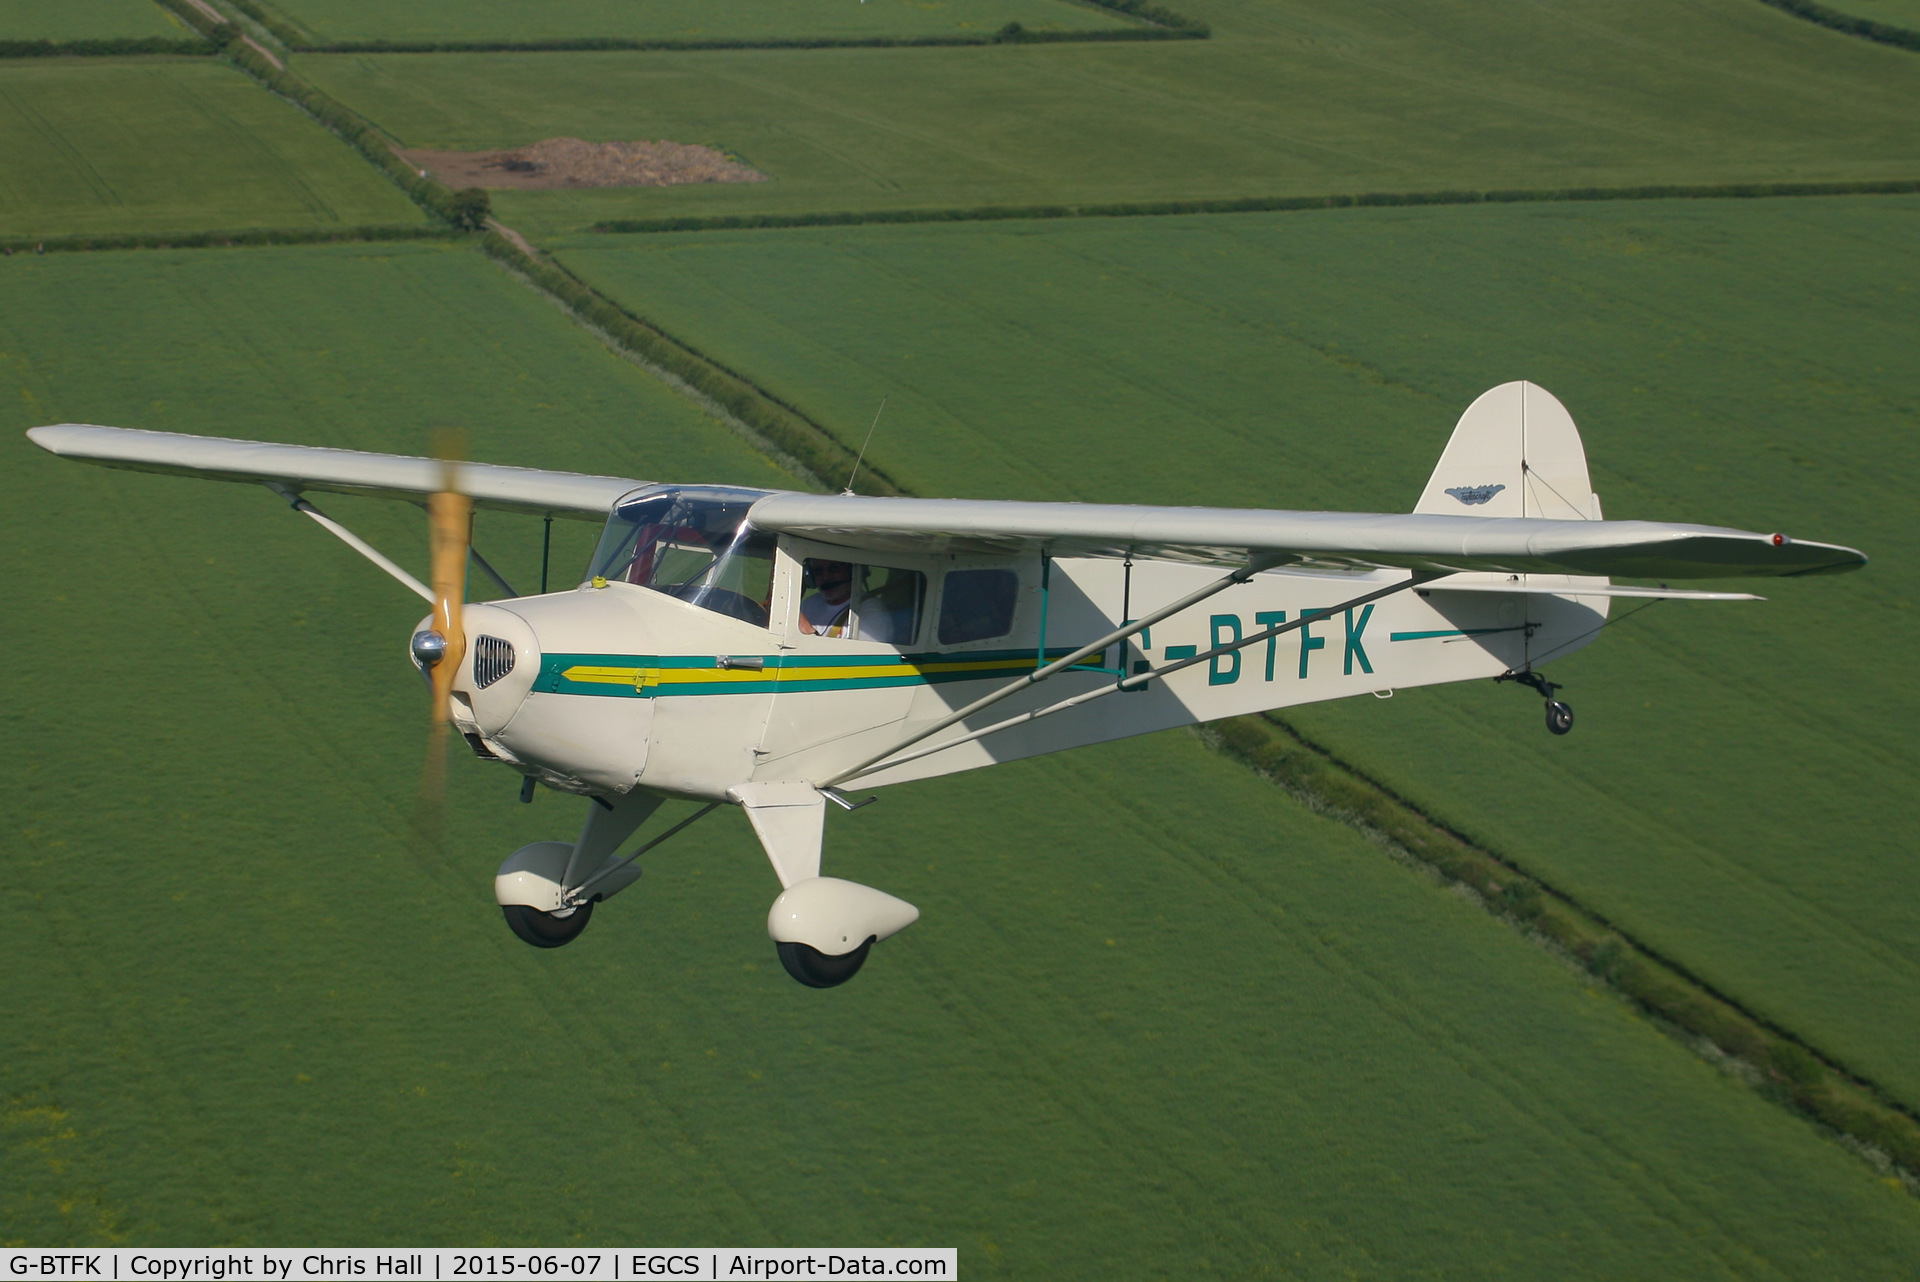 G-BTFK, 1947 Taylorcraft BC-12D Twosome C/N 10540, A2A with BTFK, photo taken from Cessna 120 G-AJJS